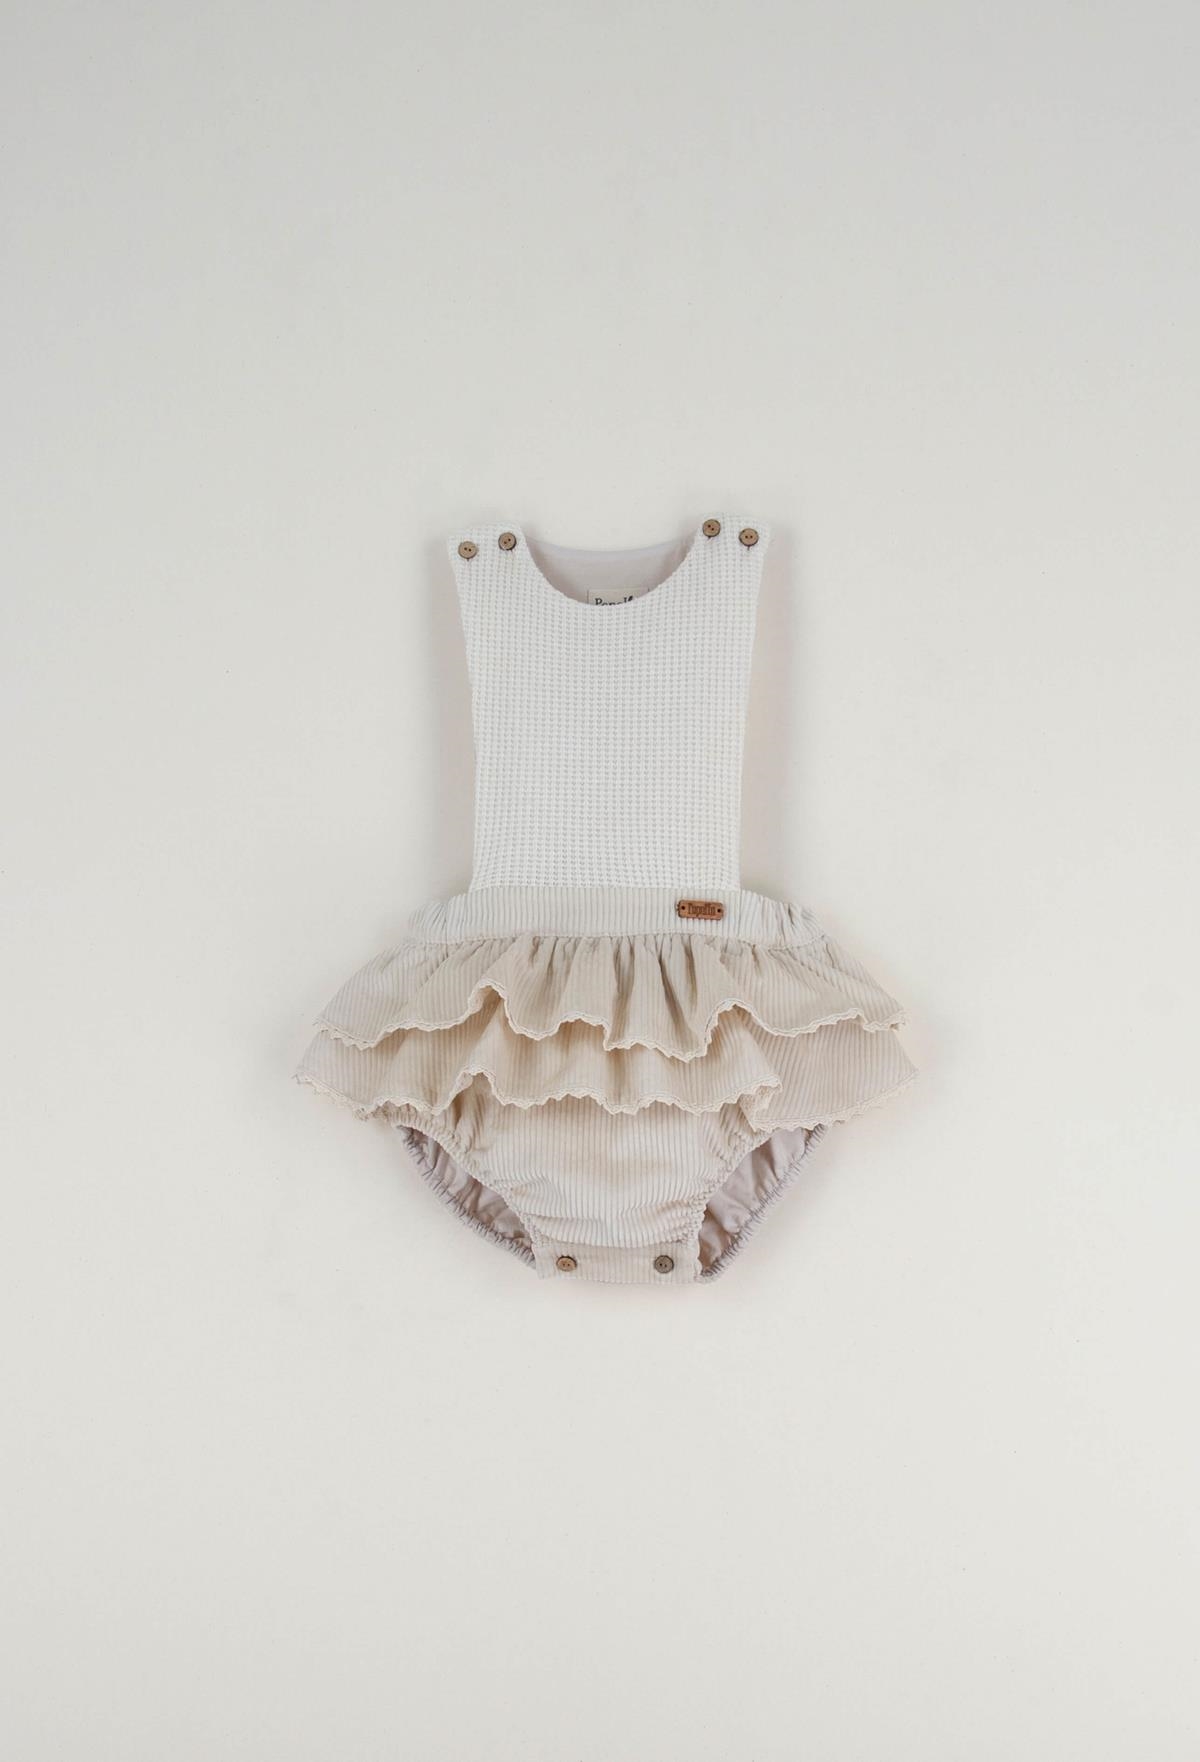 Mod.1.1 Off-white frilled romper suit with bib | AW22.23 Mod.1.1 Off-white frilled romper suit with bib